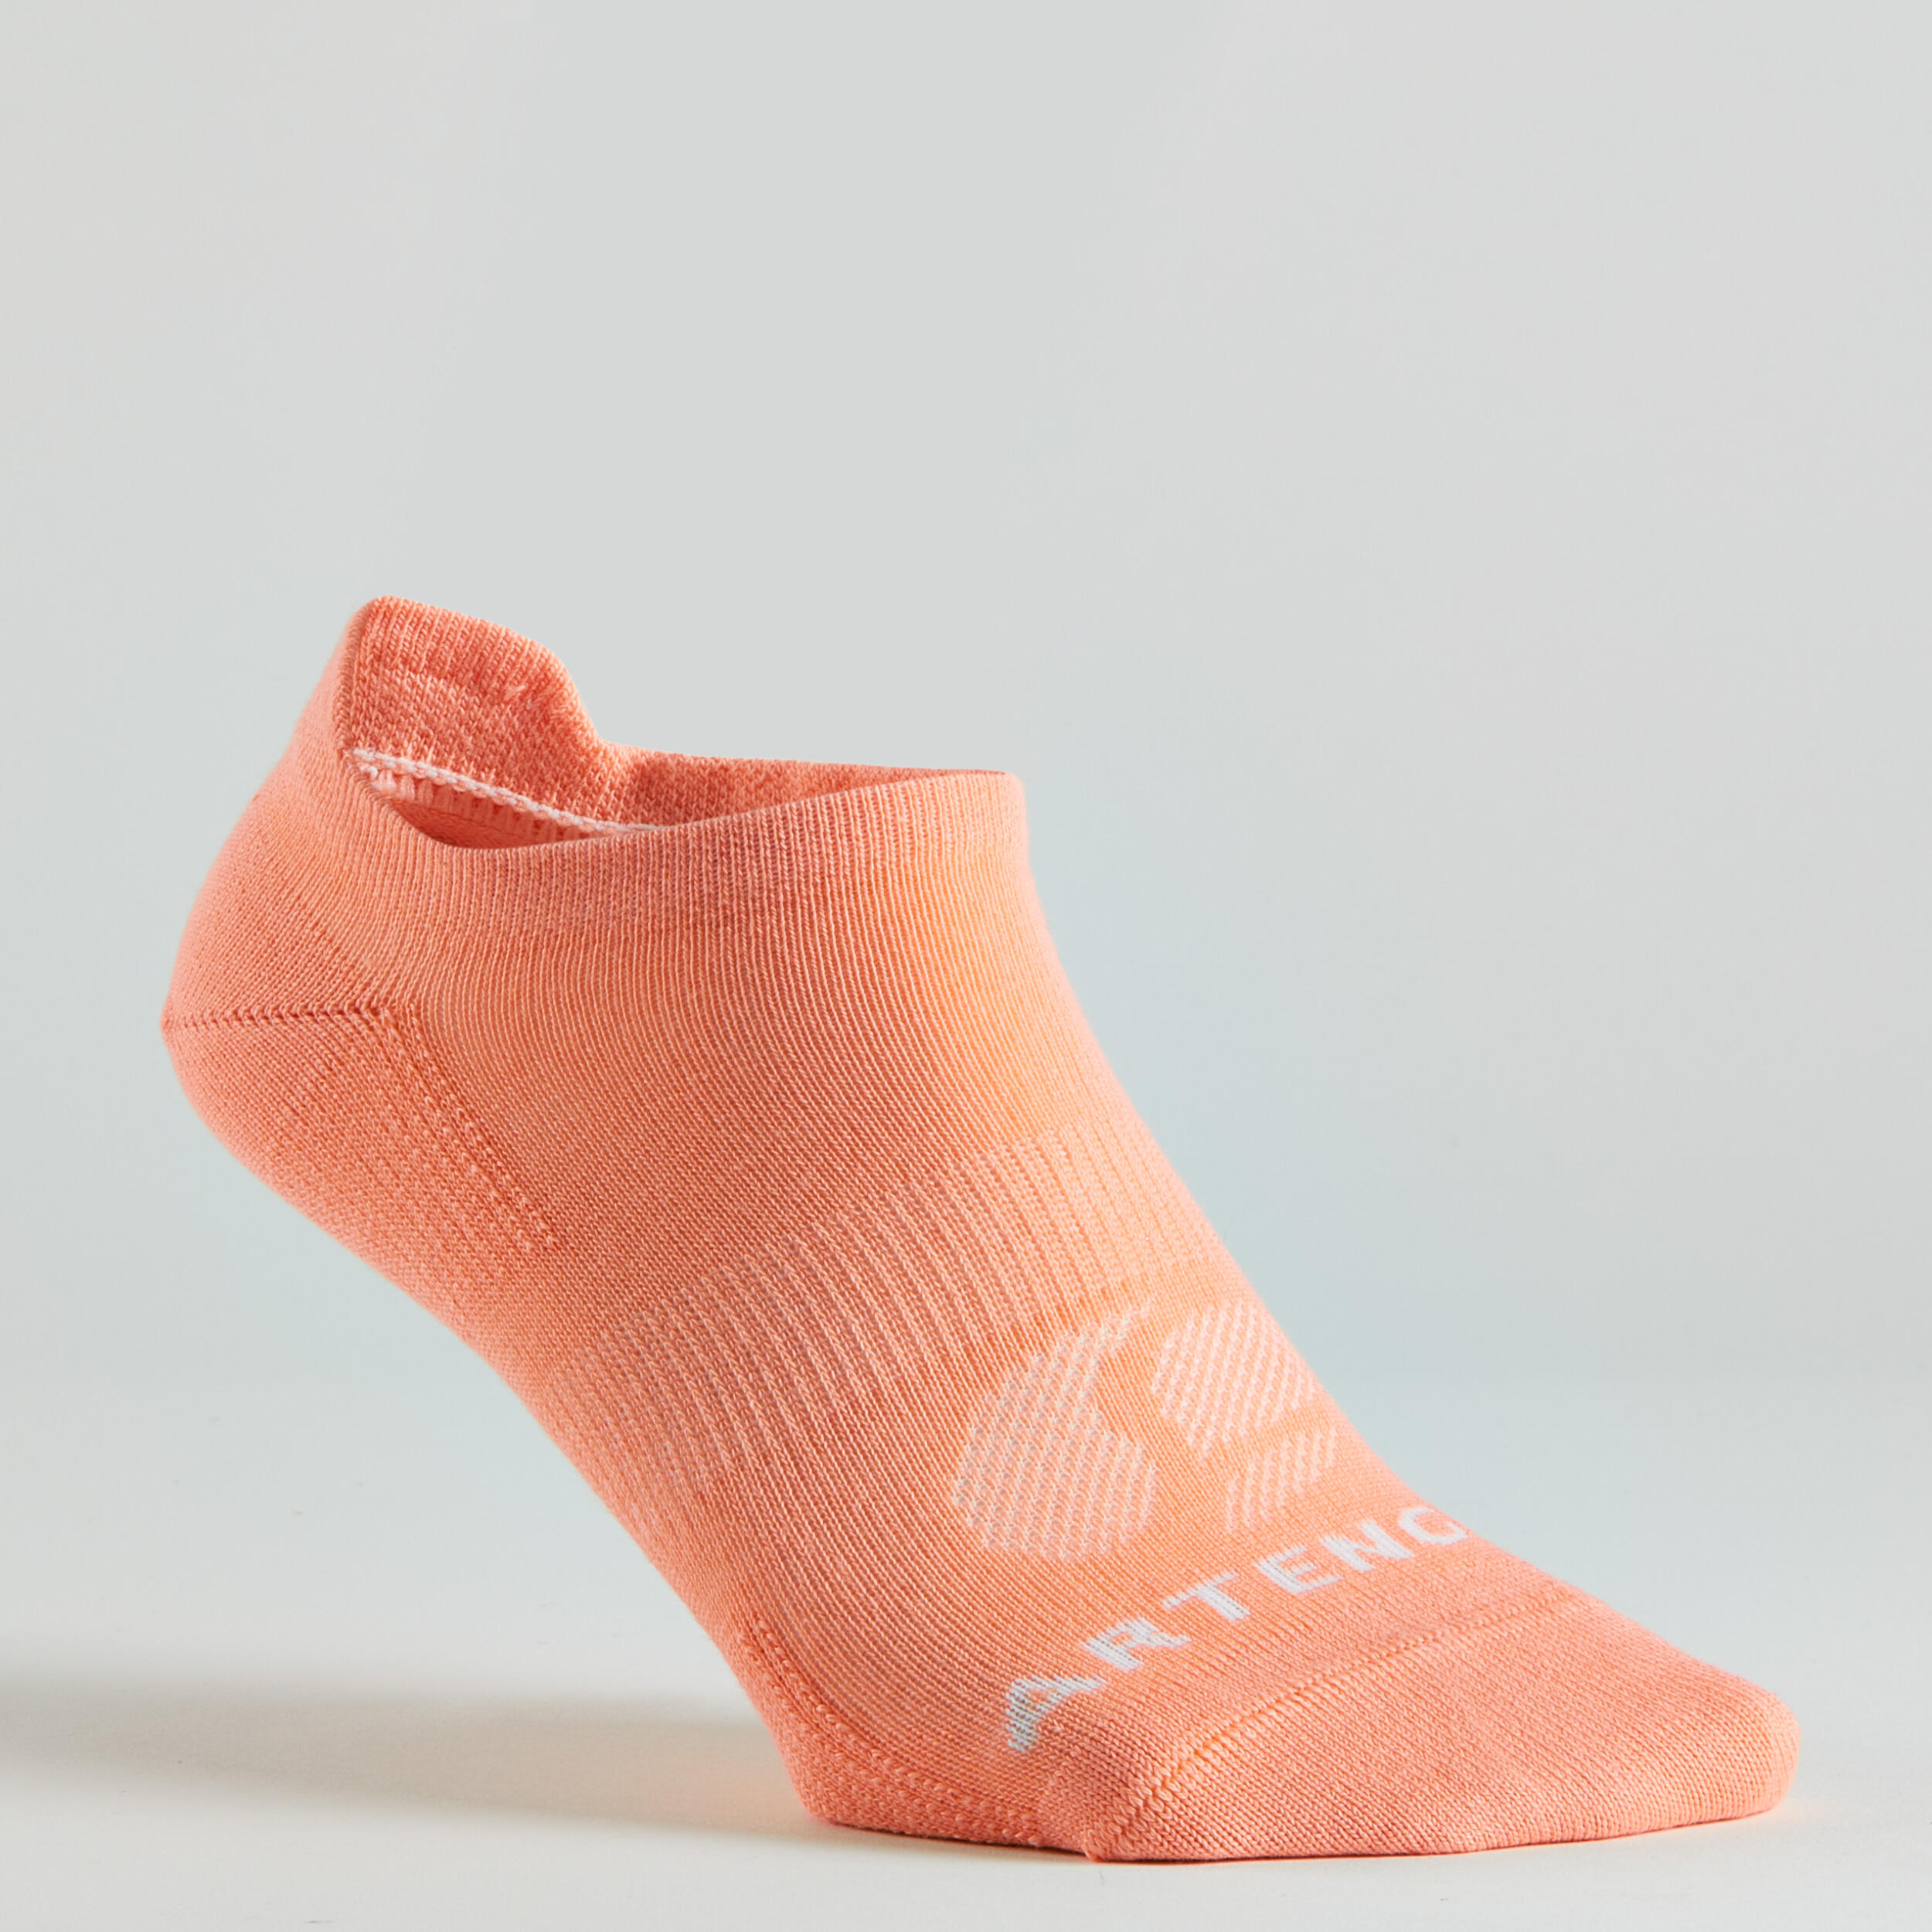 Low Sports Socks RS 160 Tri-Pack - Apricot/Pink/Navy 2/14